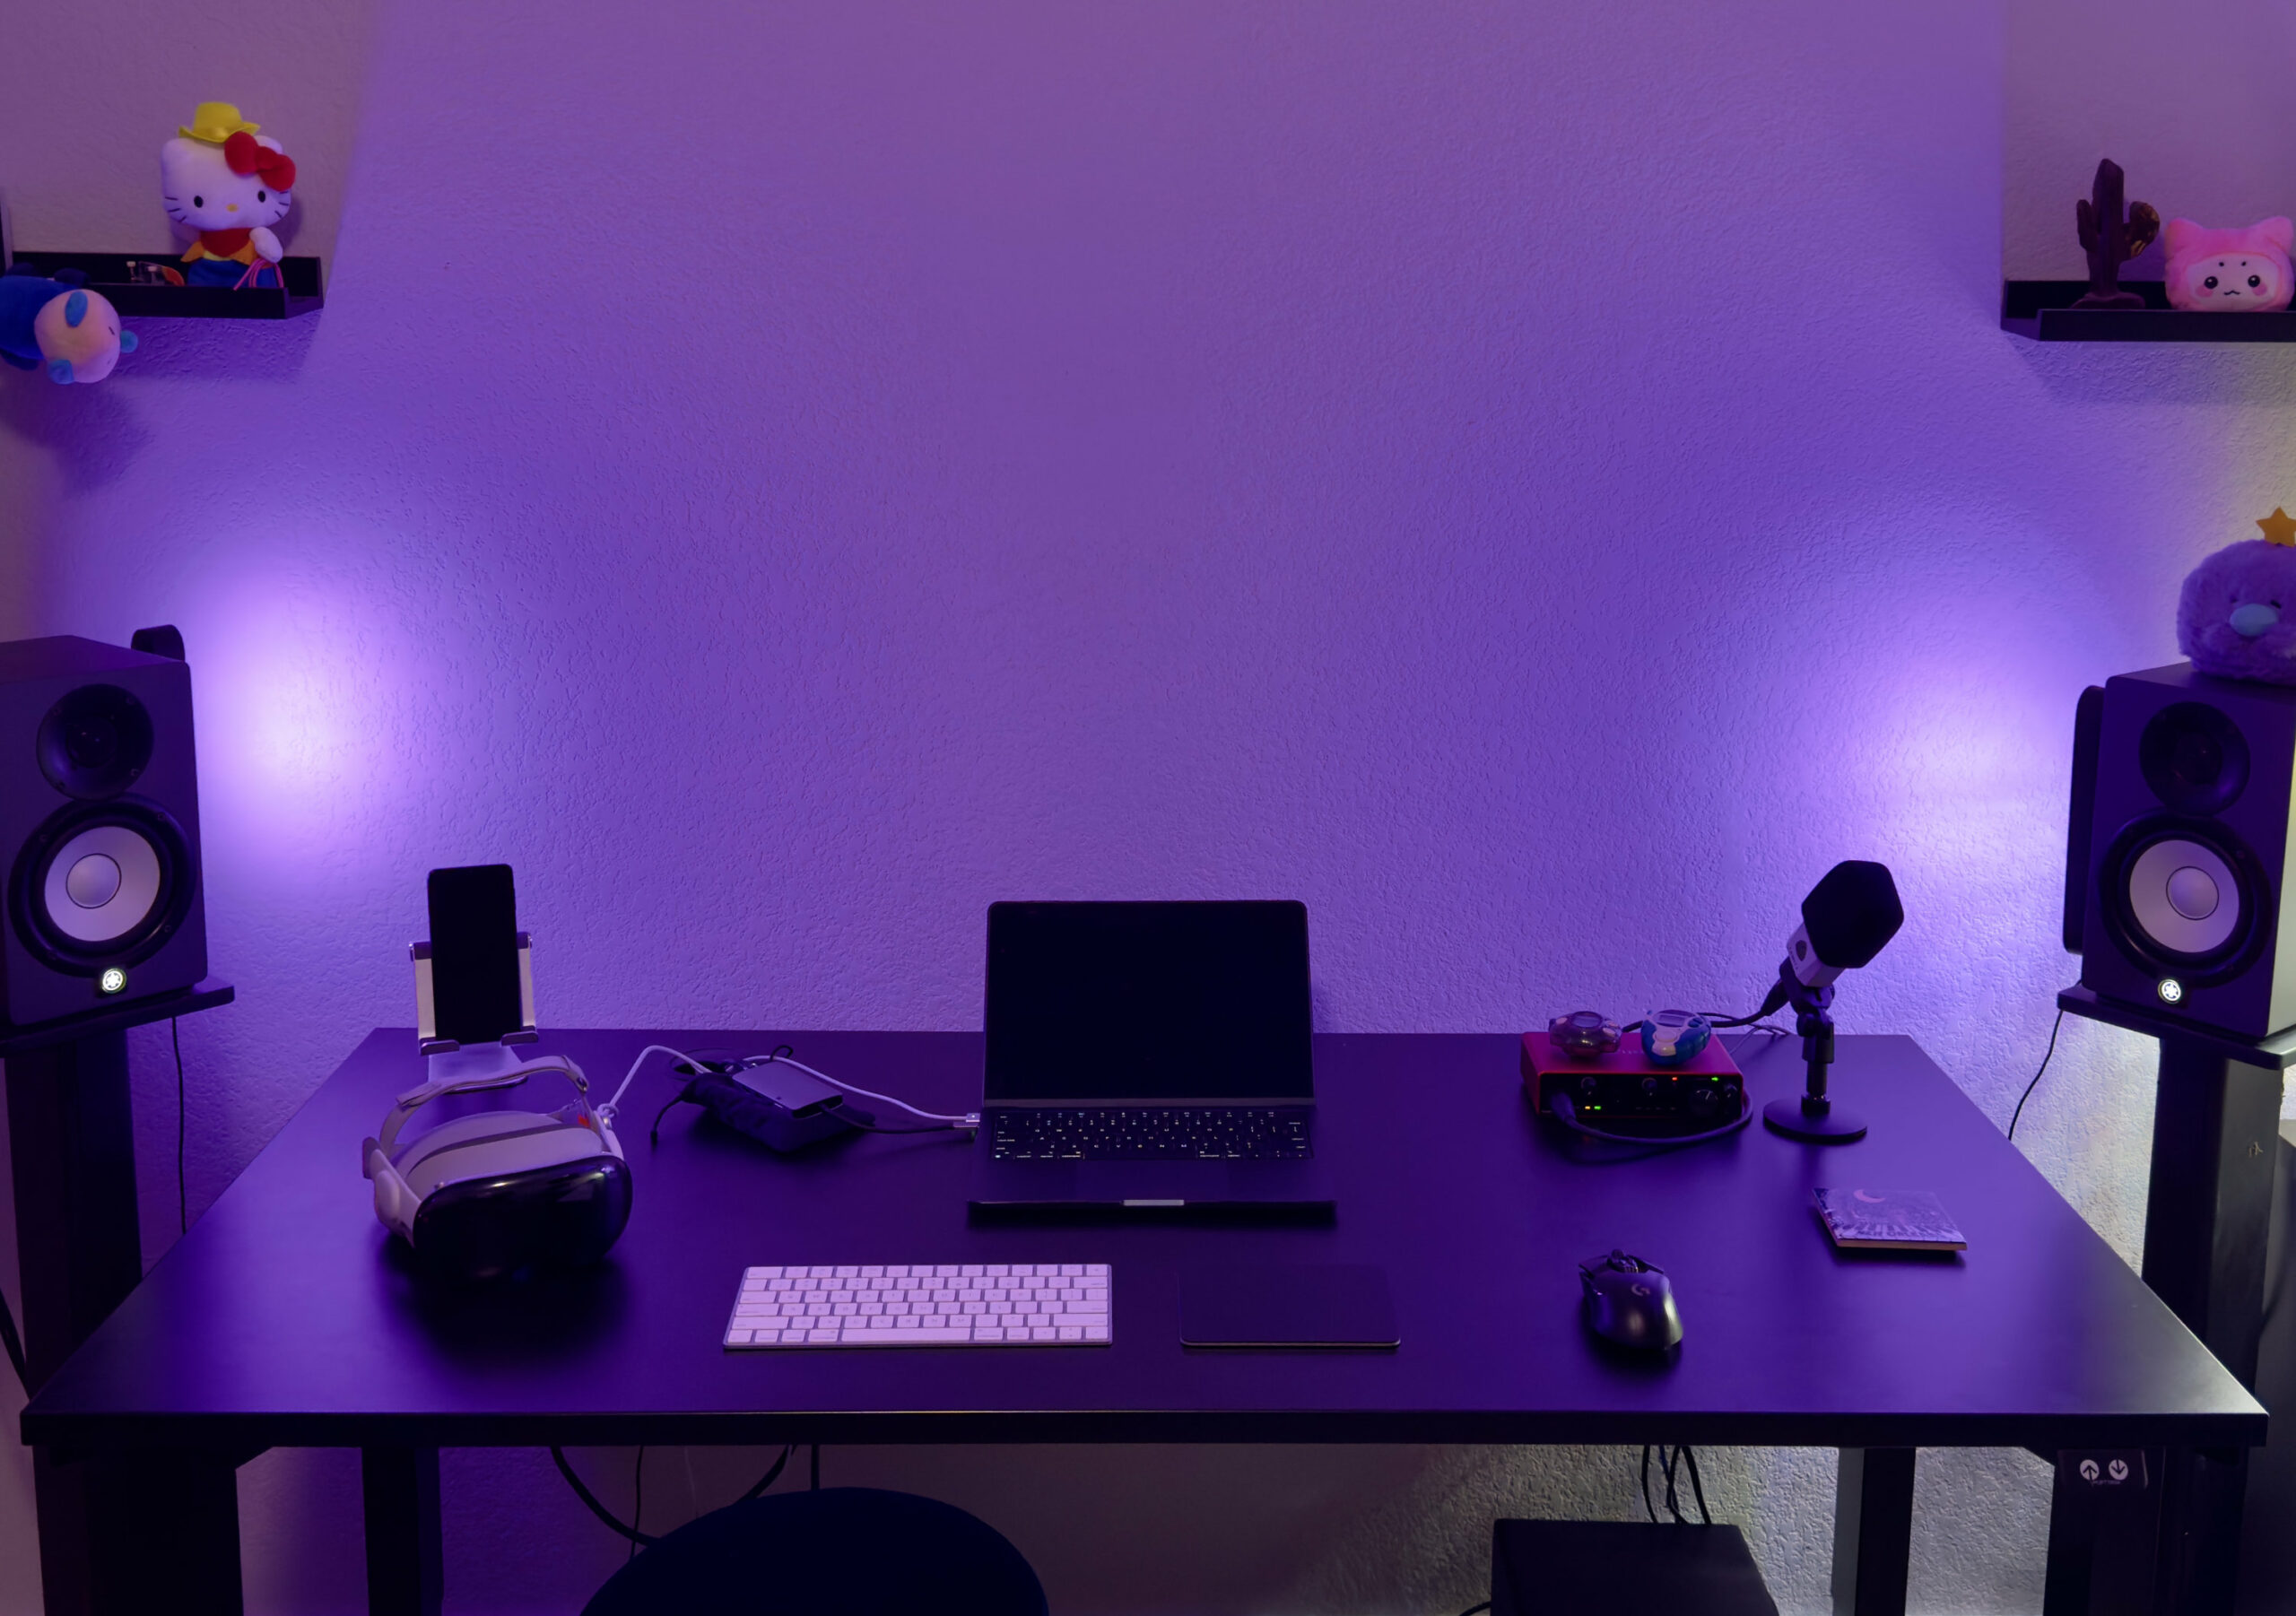 A black desk with a Vision Pro, macbook air, mouse and trackpad, and an audio interface. There are two speakers on each side of the desk facing me.